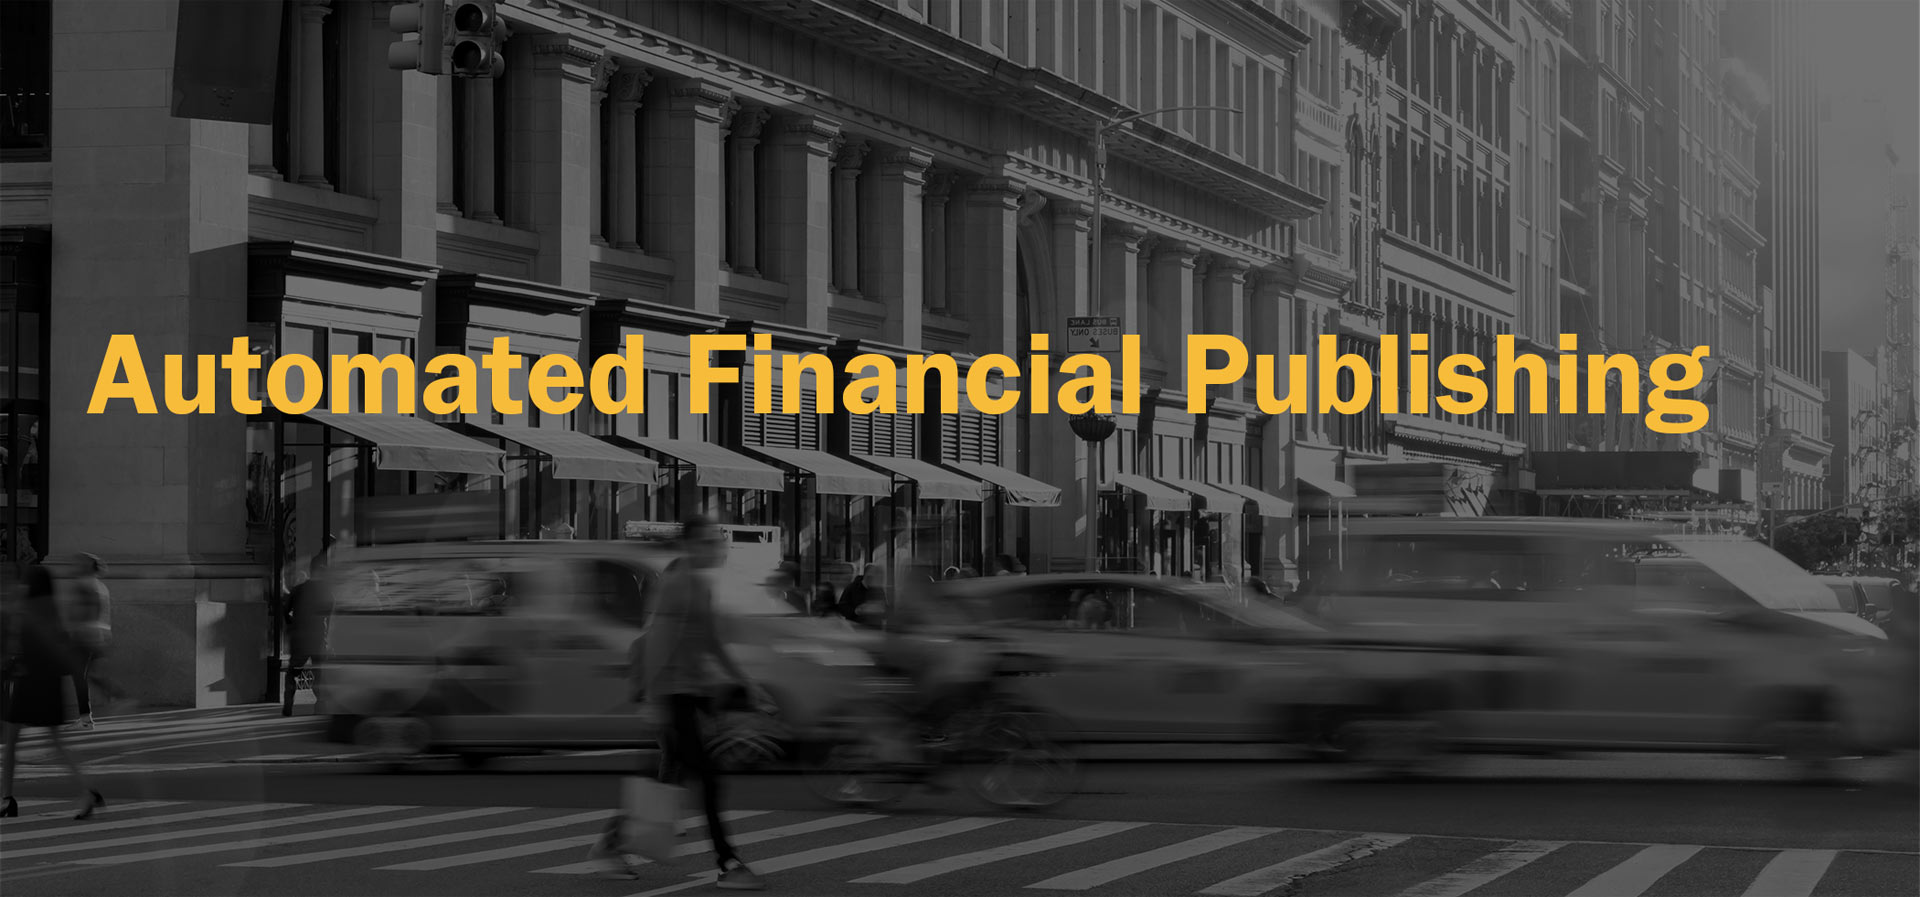 Automated, Financial Publishing